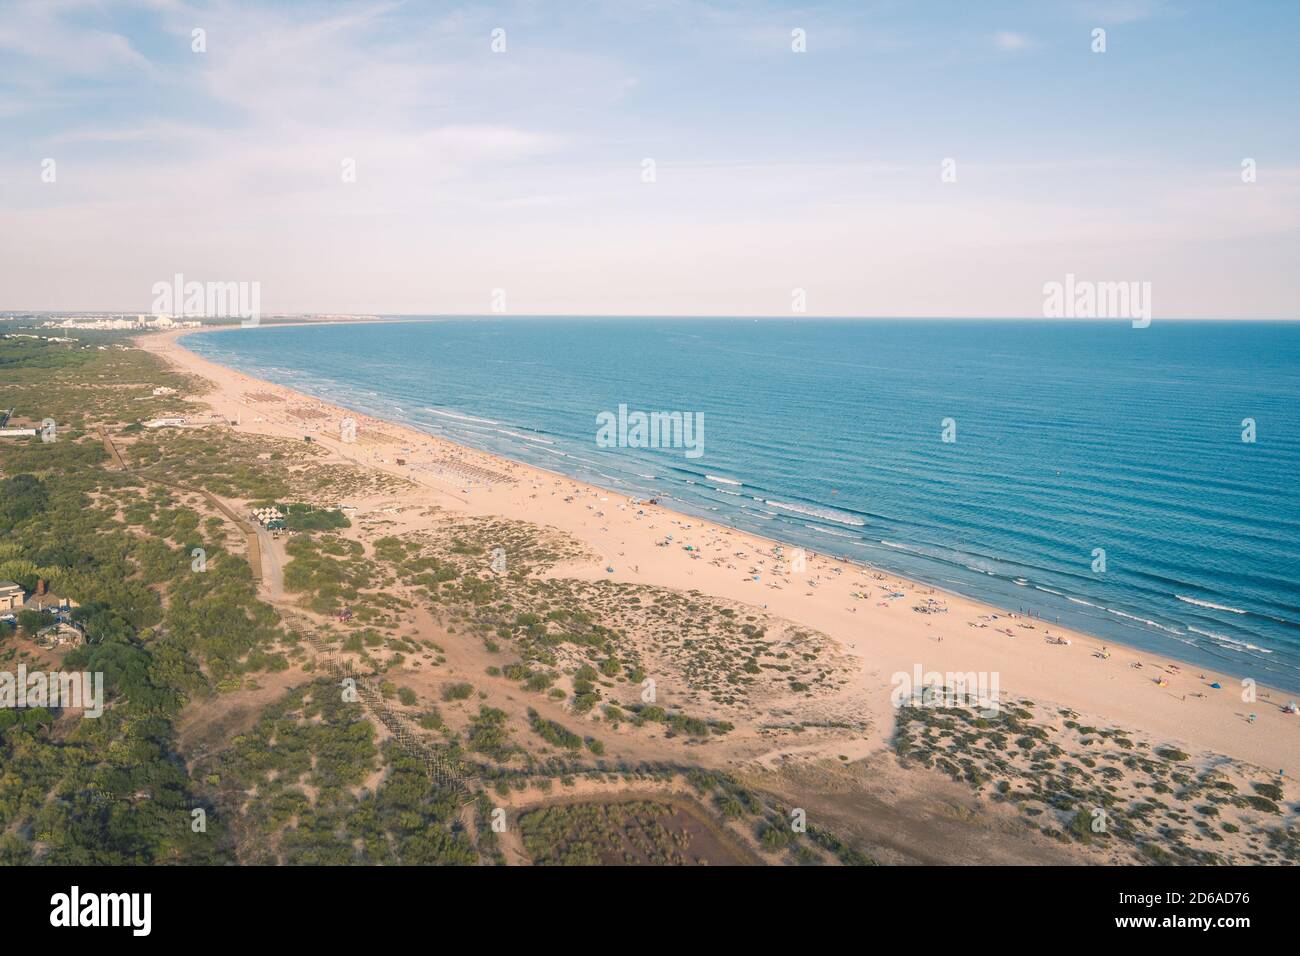 View of Ria Formosa and ocean from above, by drone Stock Photo